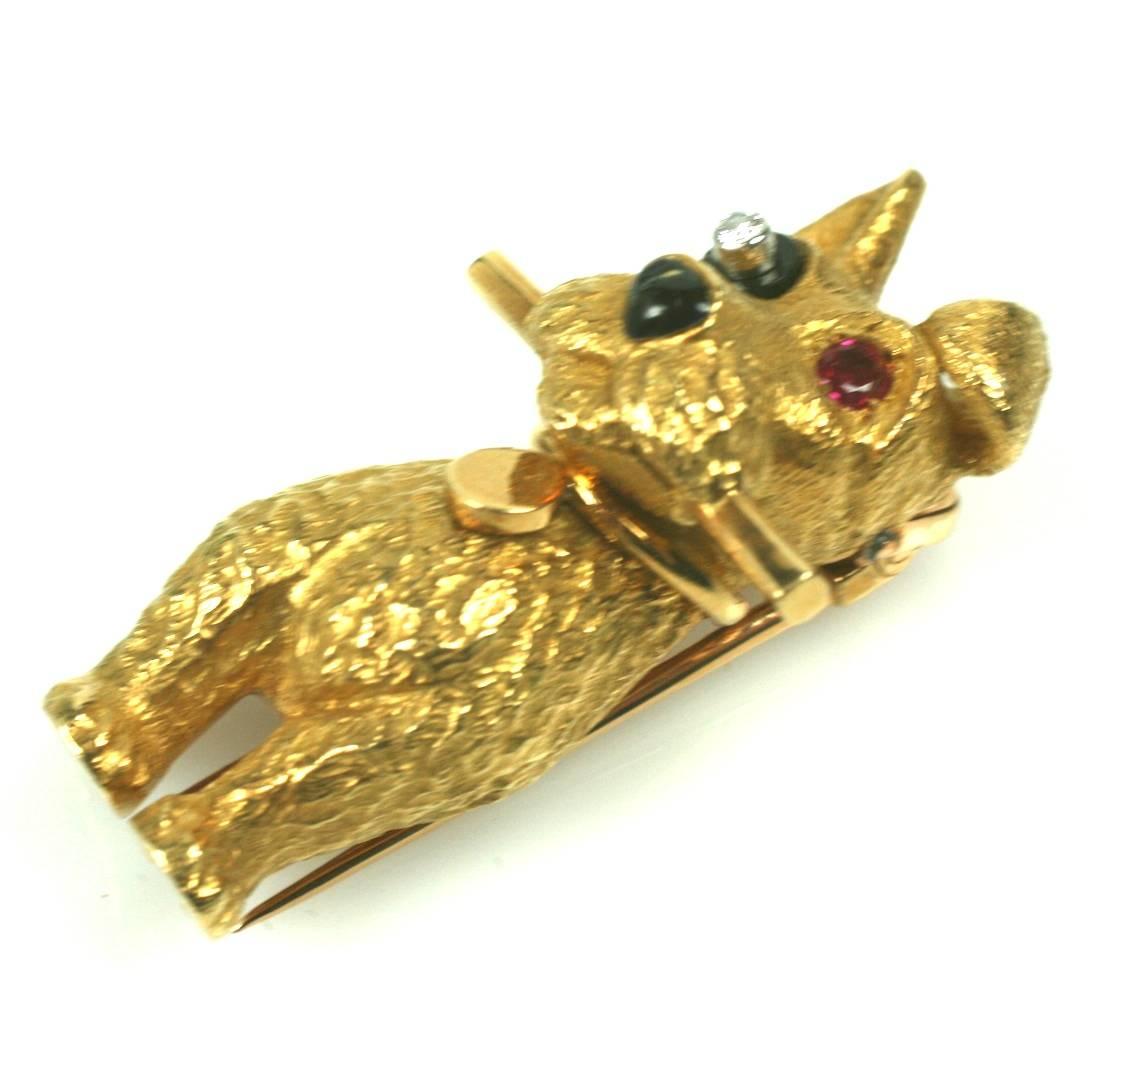 Faithful terrier clip-brooch in 18k gold with onyx eye patch, bezel set diamond, and ruby eye by Cartier, Paris. Beautifully modeled, finely detailed, with ID collar/charm and prized stick in mouth. 1950's France. Excellent condition.
1.5